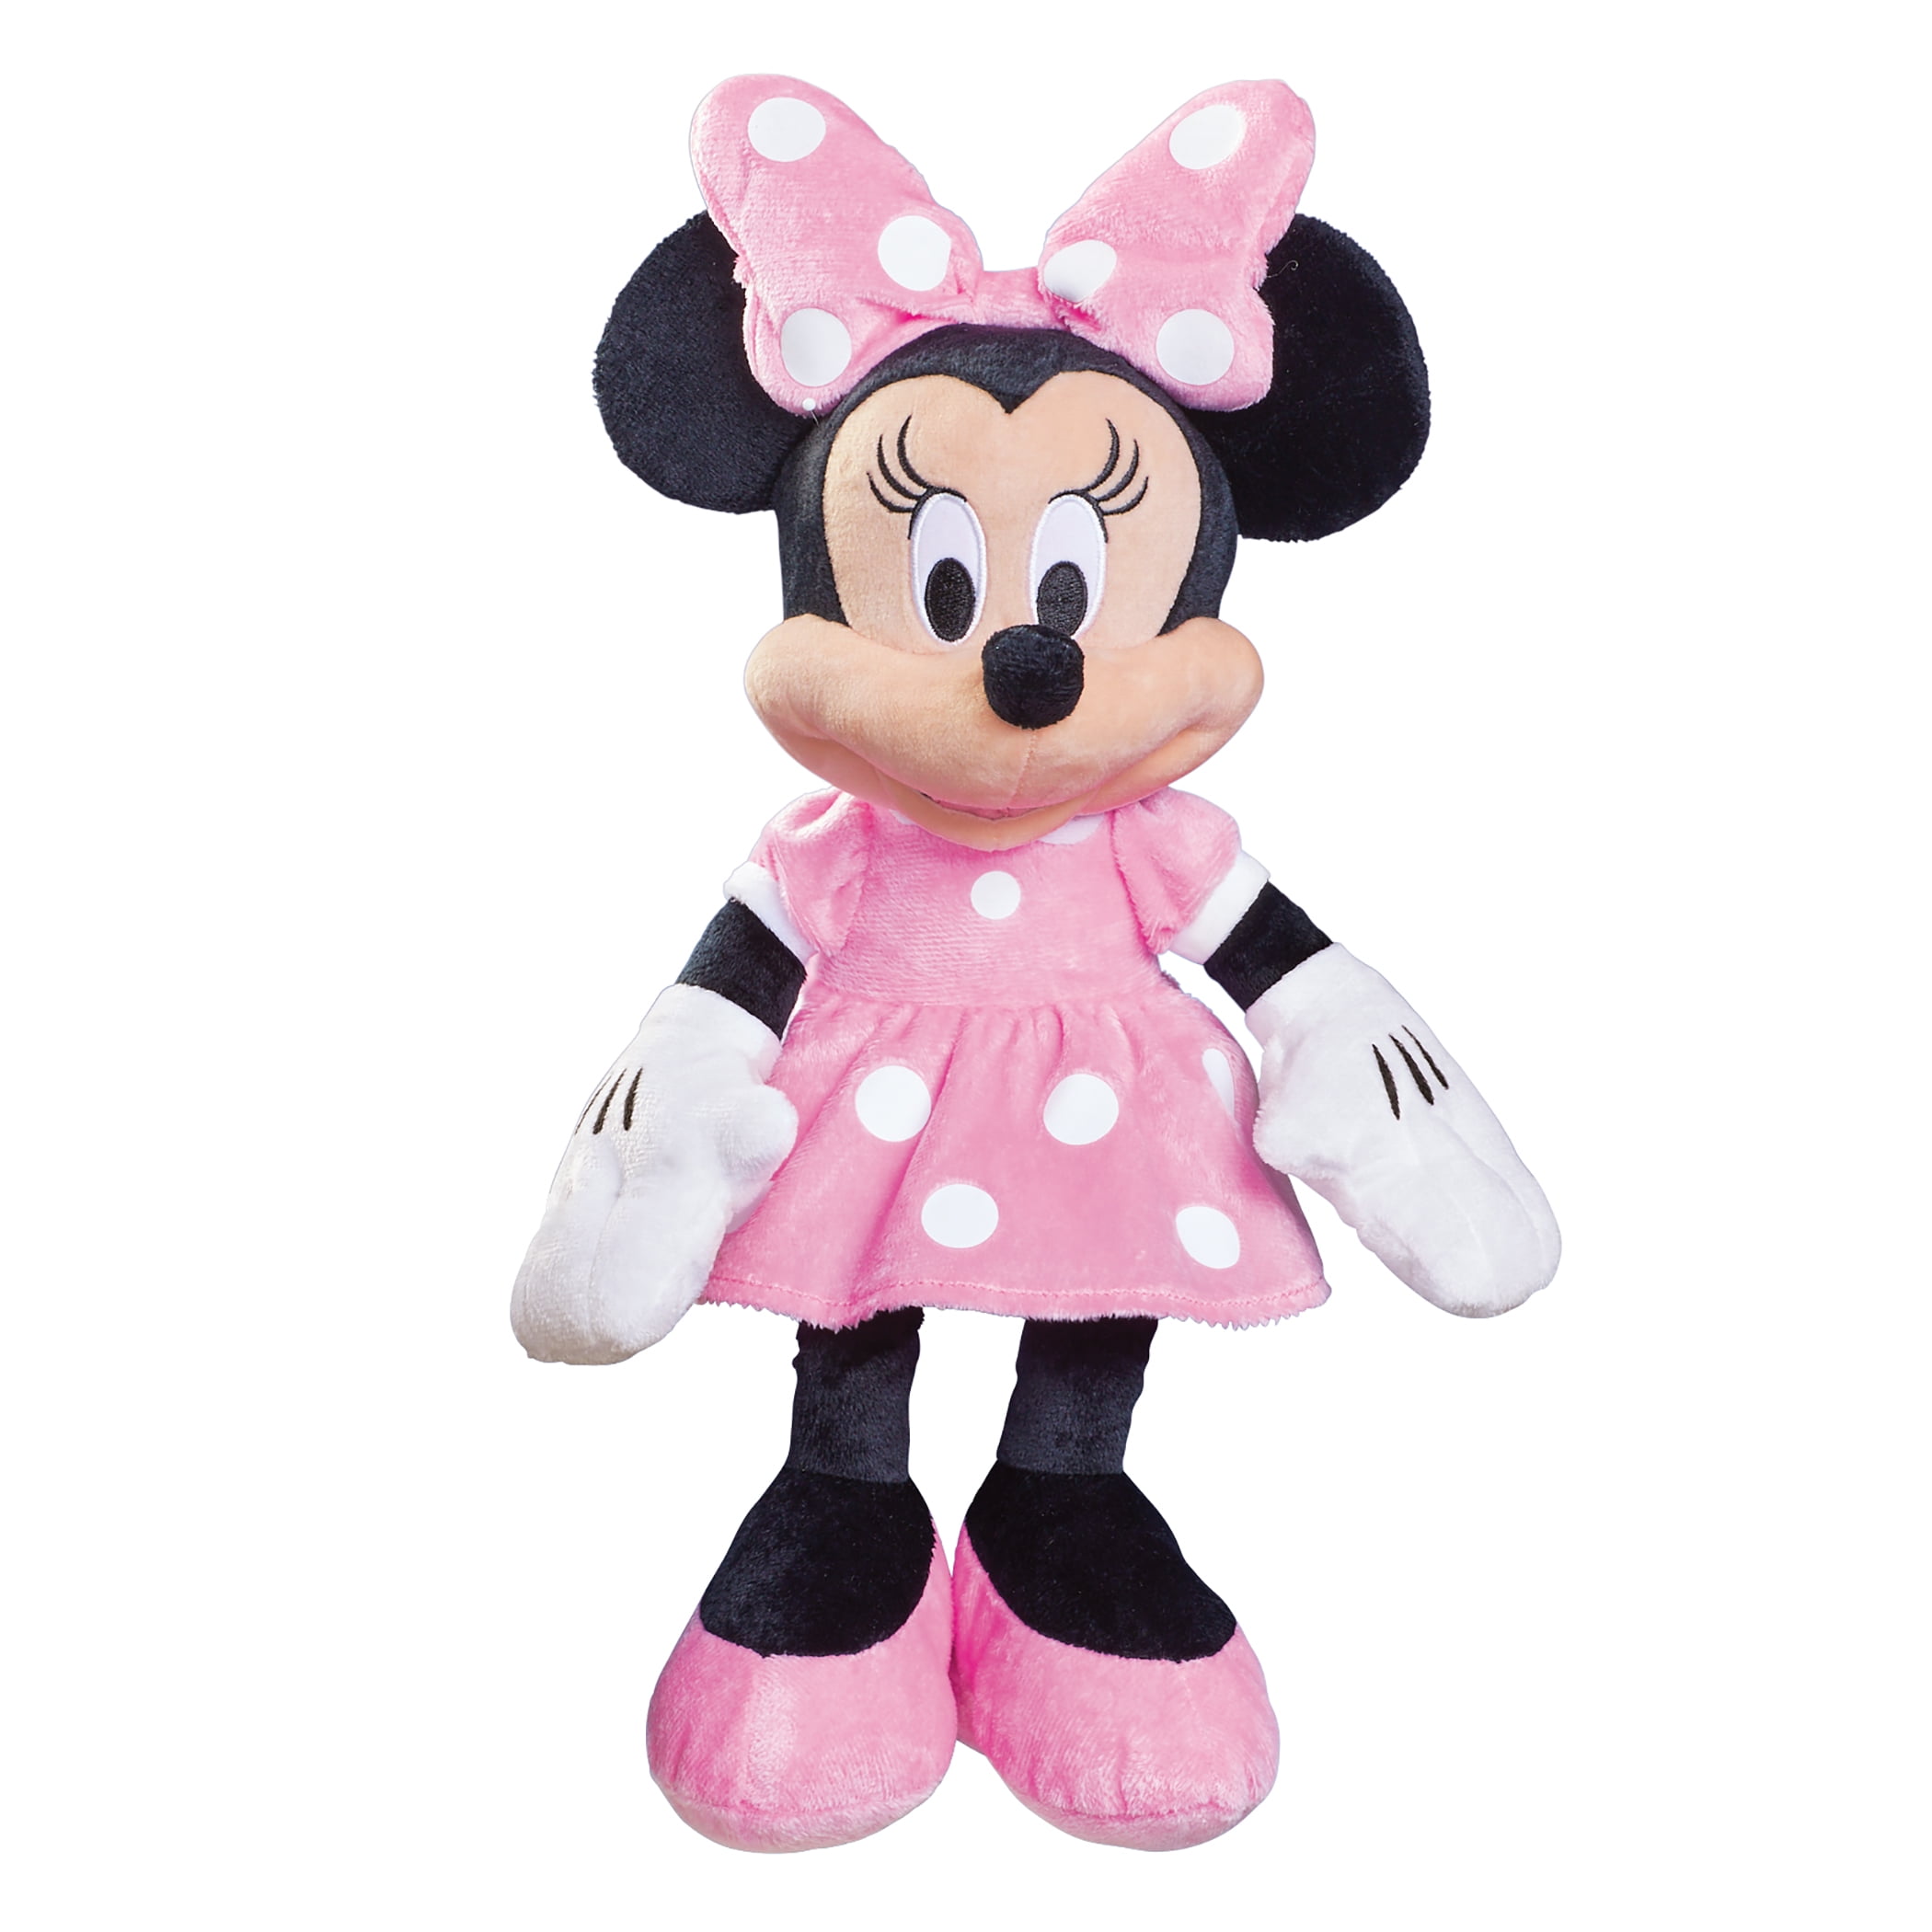 Disney Parks Minnie Mouse Pink Polka Dot Plush Toy 9" Soft Doll Girls Gift NEW 